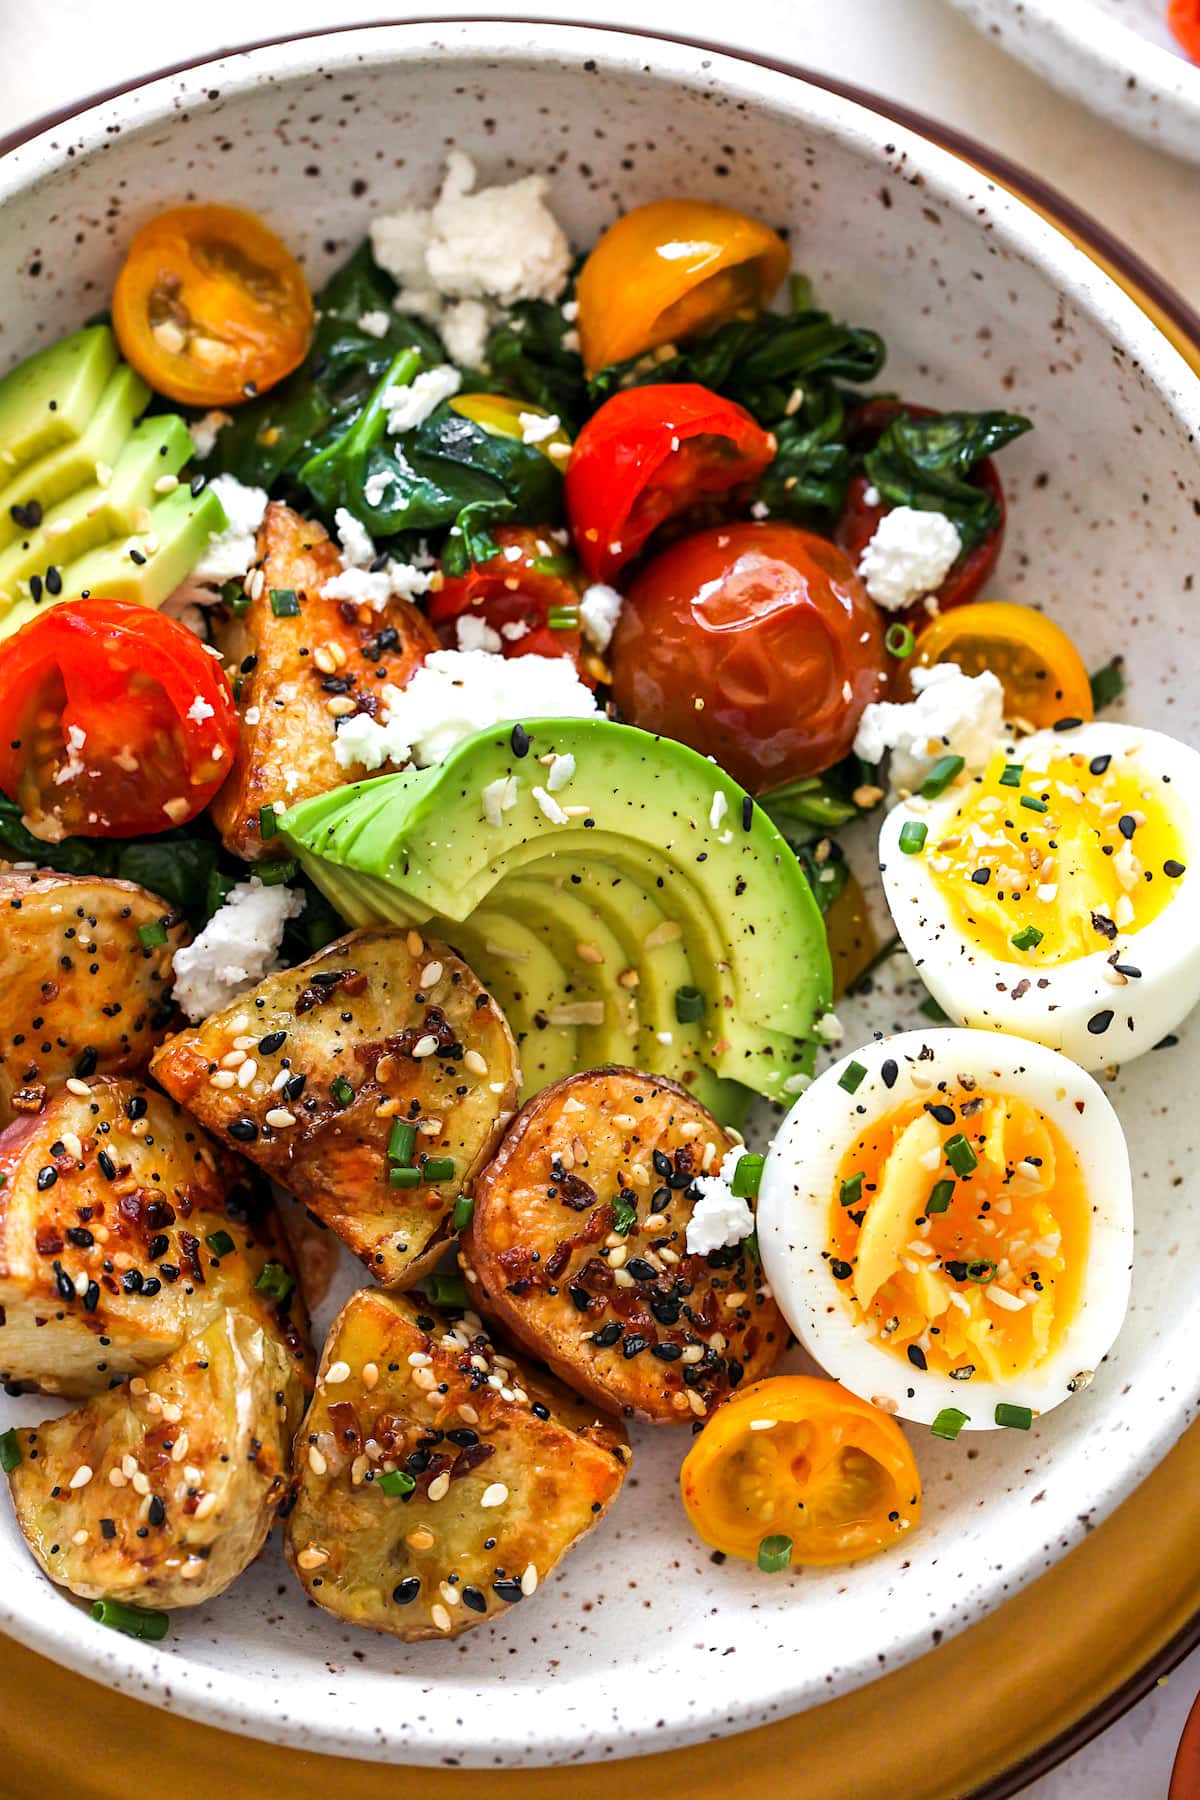 Savory Breakfast Bowl with potatoes, eggs, avocado, tomatoes, and spinach.